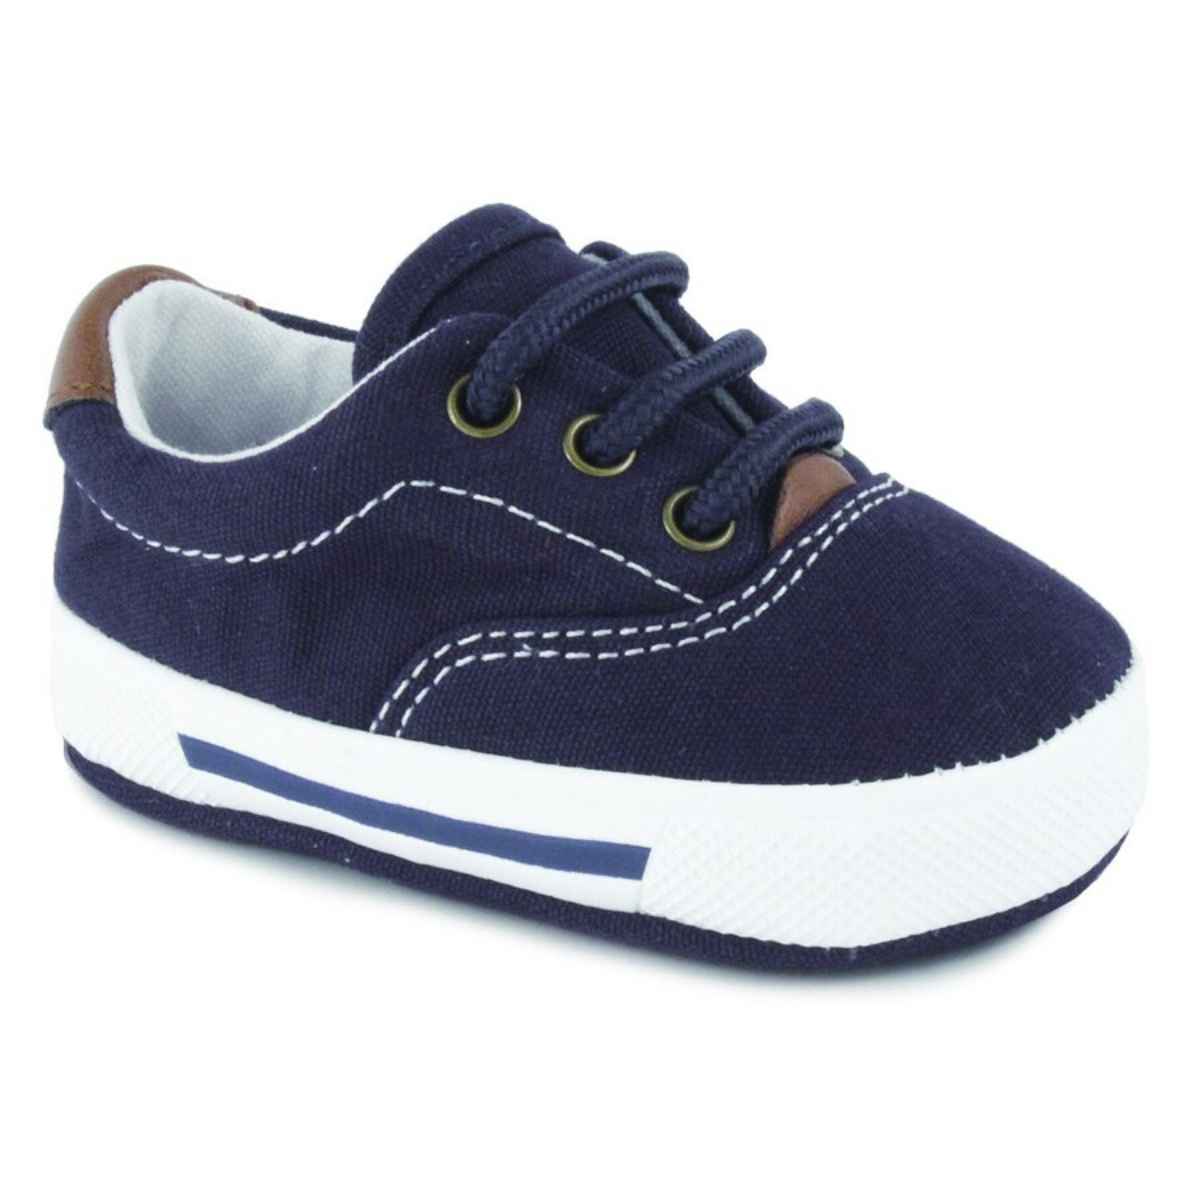 Beverly Hills Polo Club Infant Canvas Shoes - Navy/tan, 2 : Target